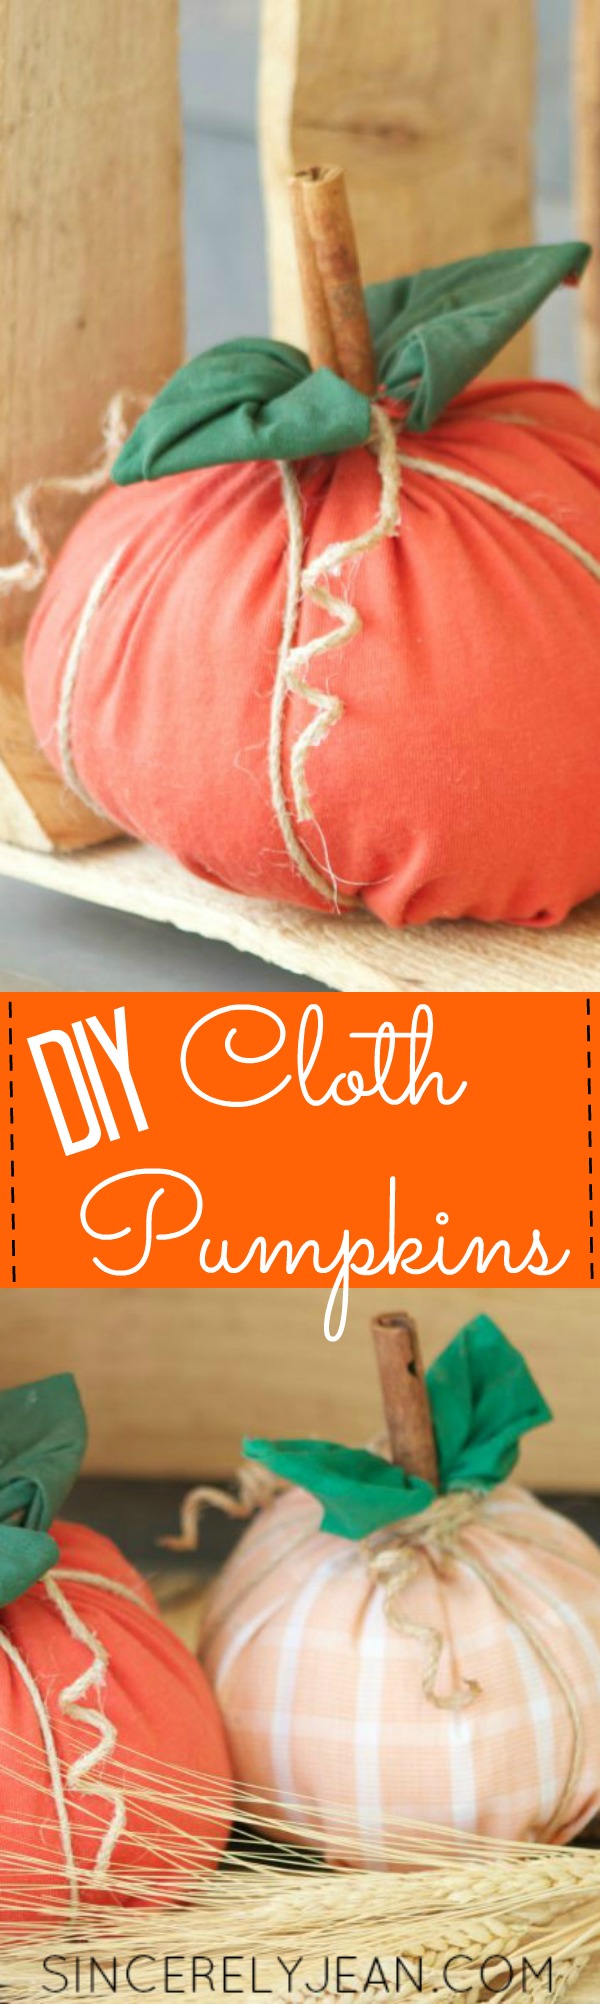 DIY CLOTH PUMPKINS - This is a cute and easy fall and Halloween craft! | www.sincerelyjean.com